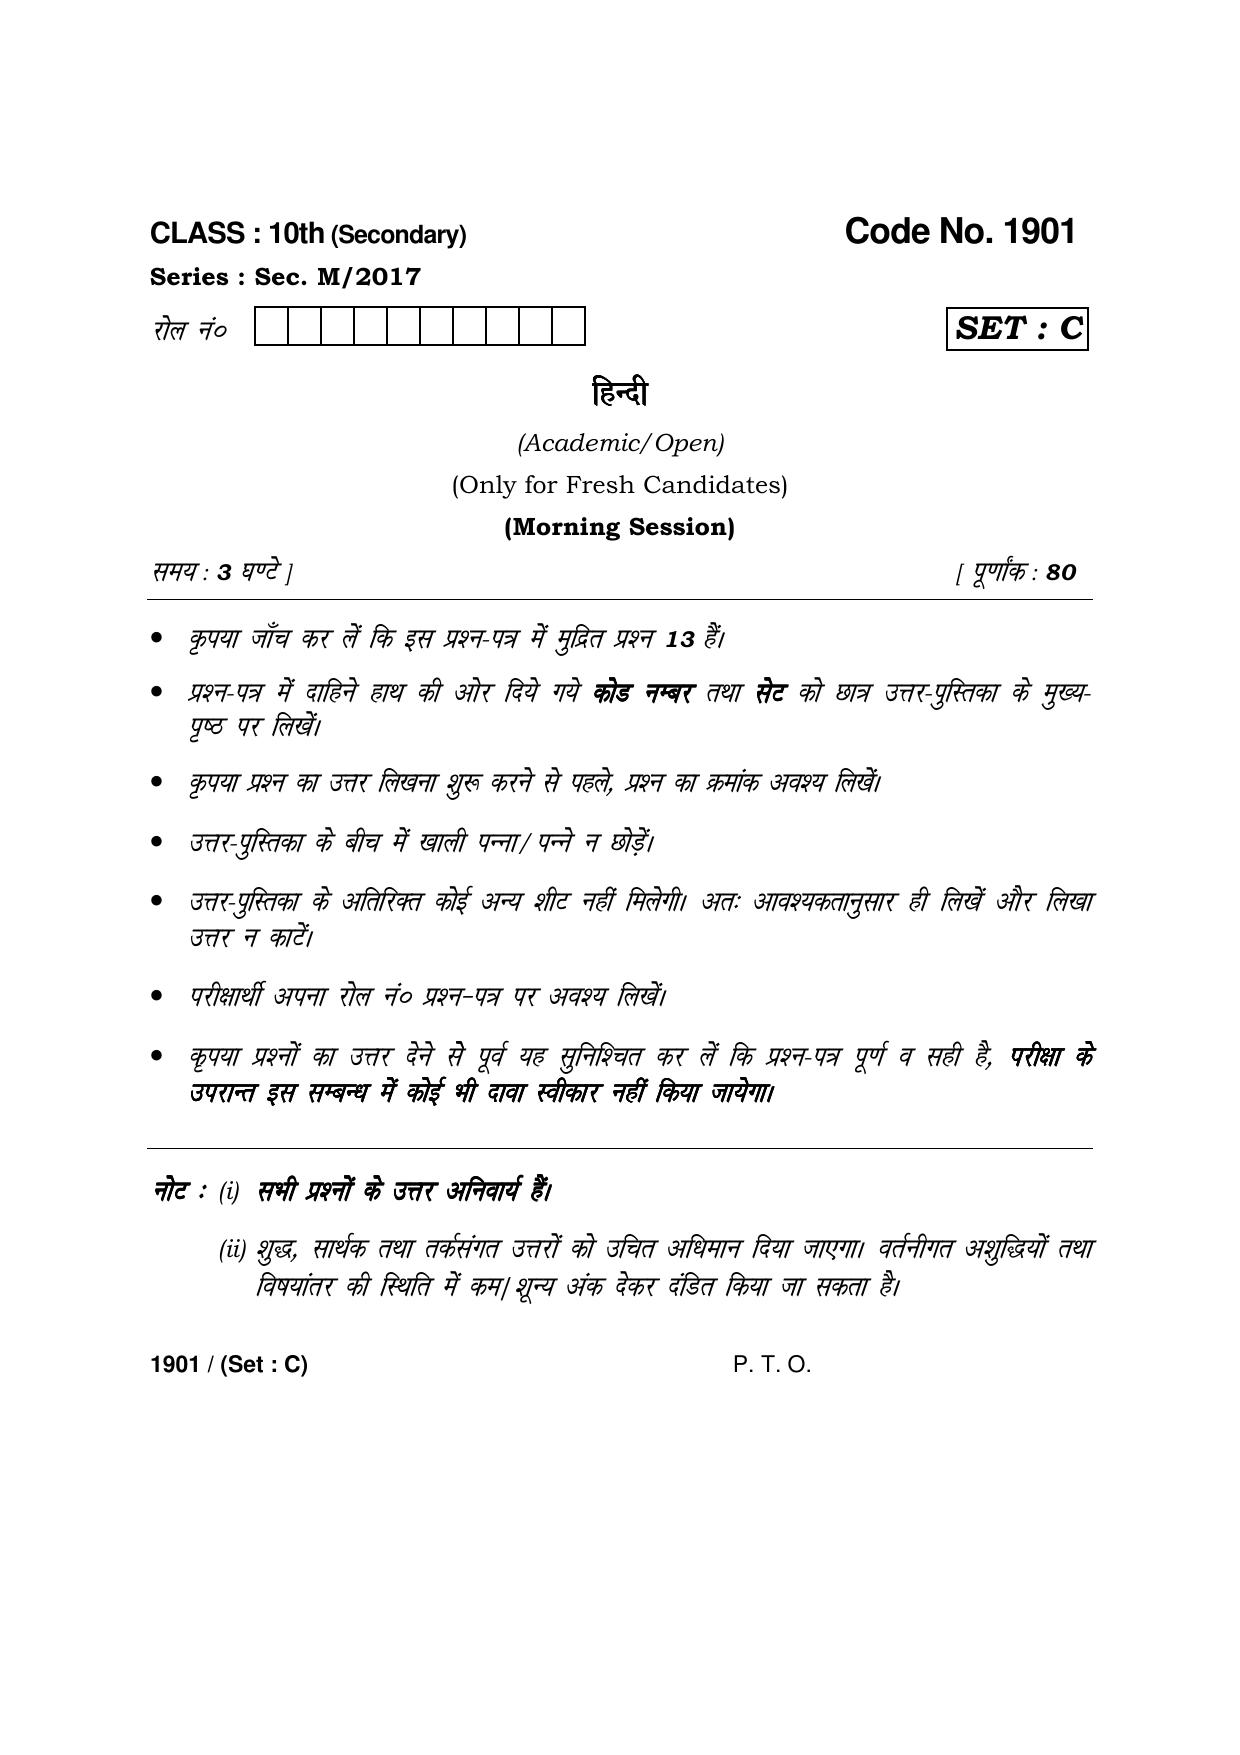 Haryana Board HBSE Class 10 Hindi -C 2017 Question Paper - Page 1